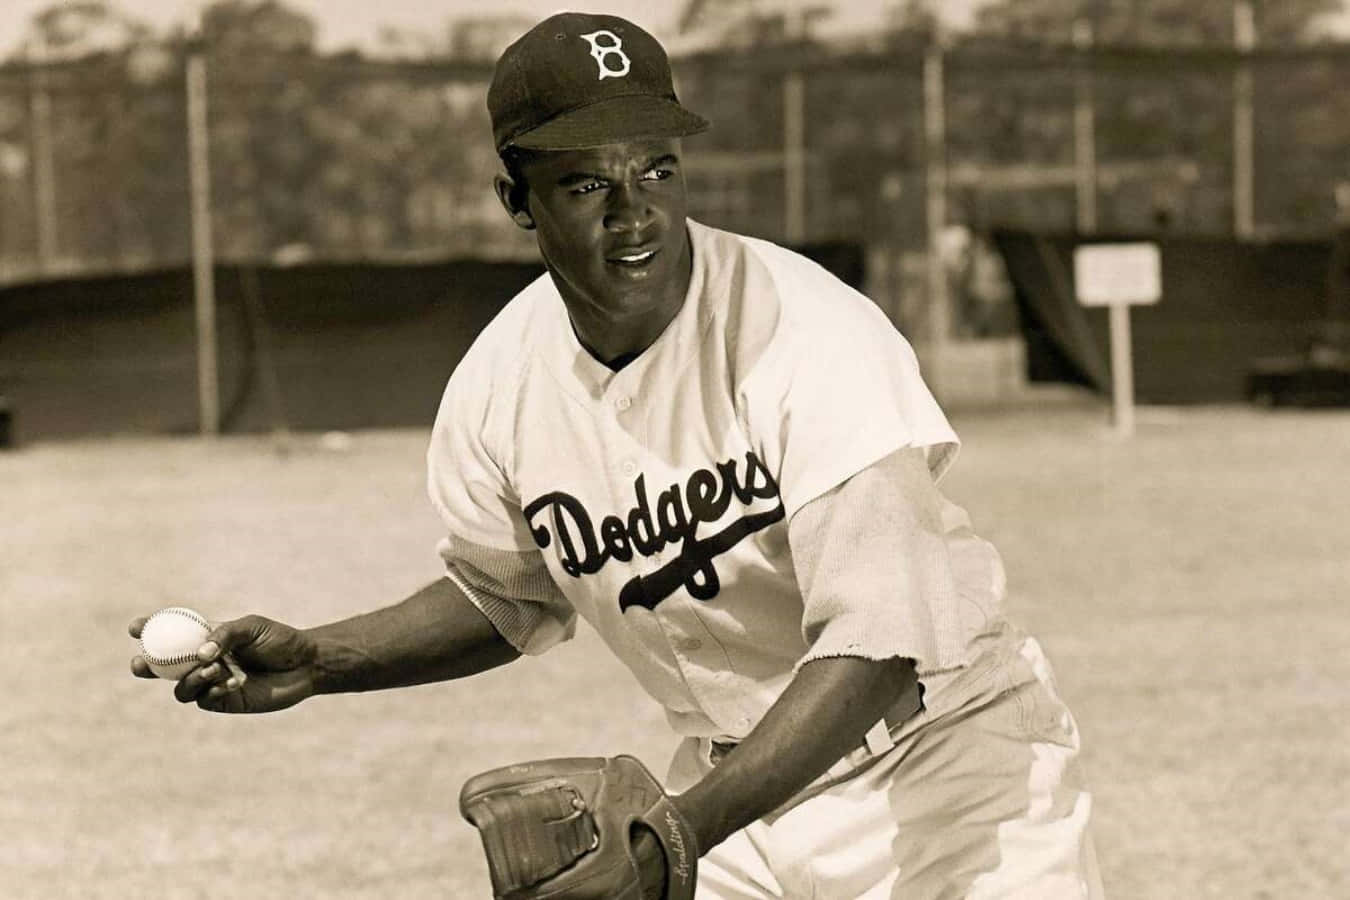 Iconic baseball player and civil rights leader Jackie Robinson